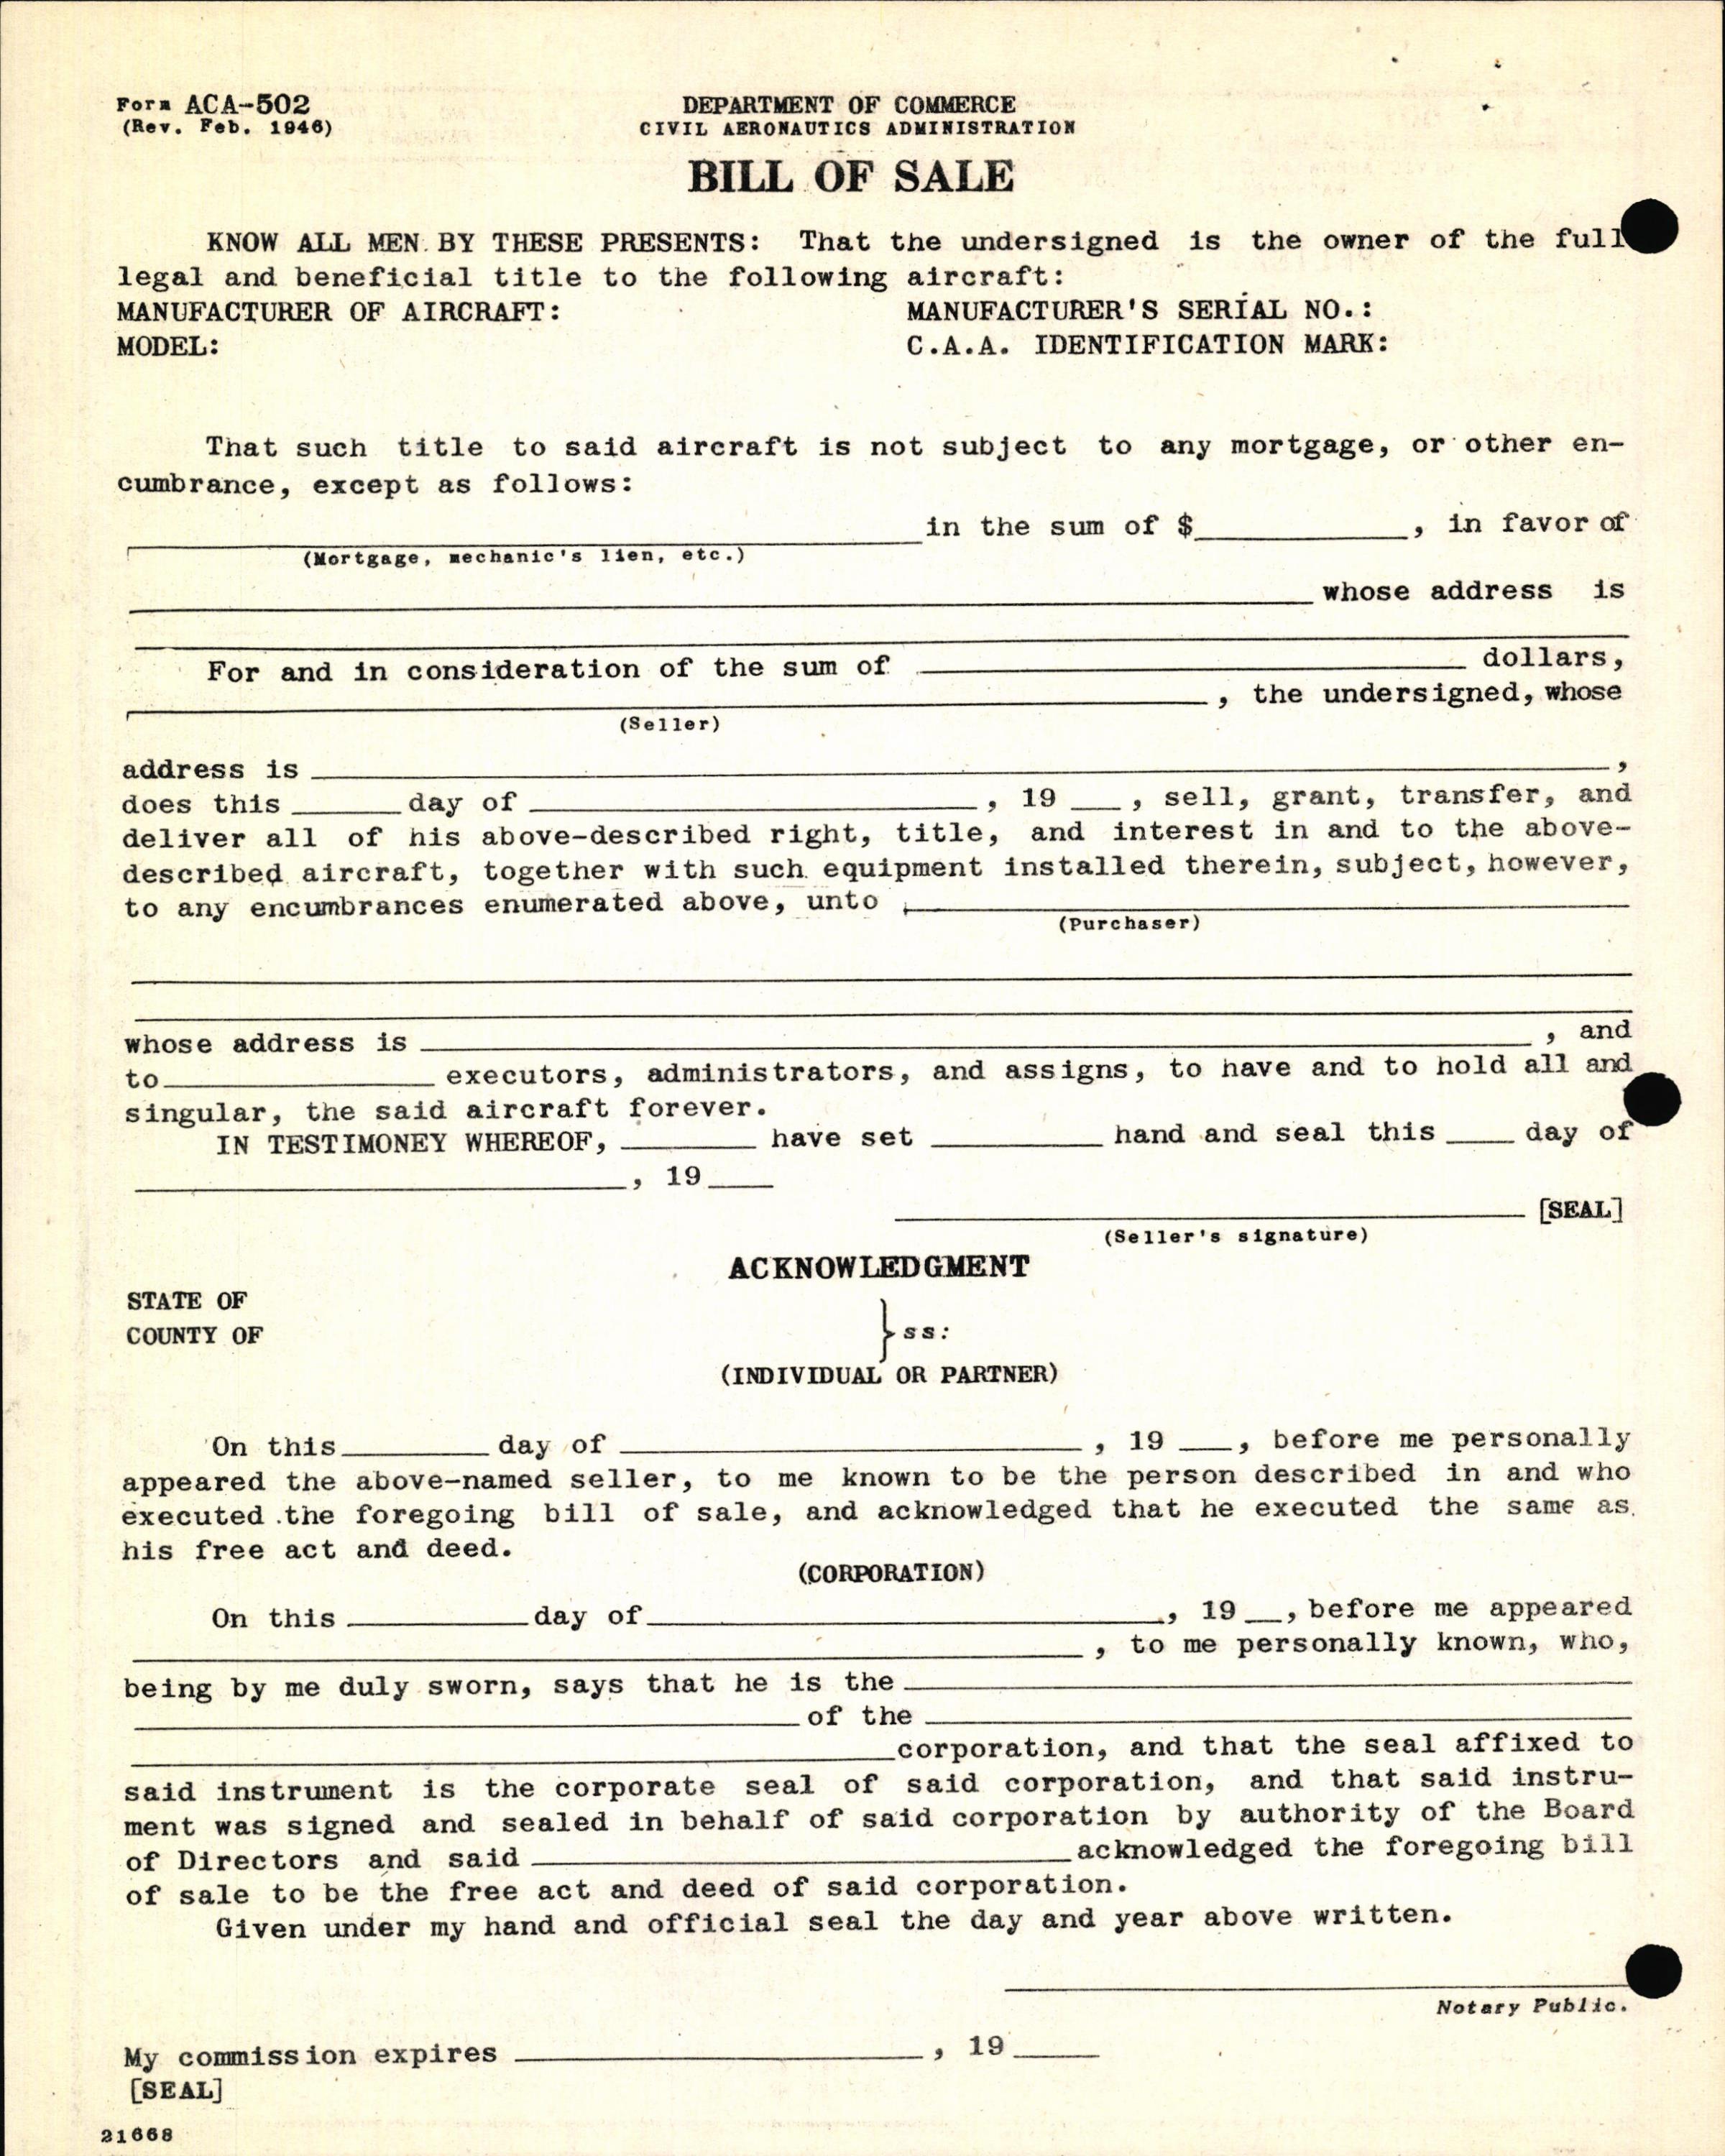 Sample page 6 from AirCorps Library document: Technical Information for Serial Number 1351